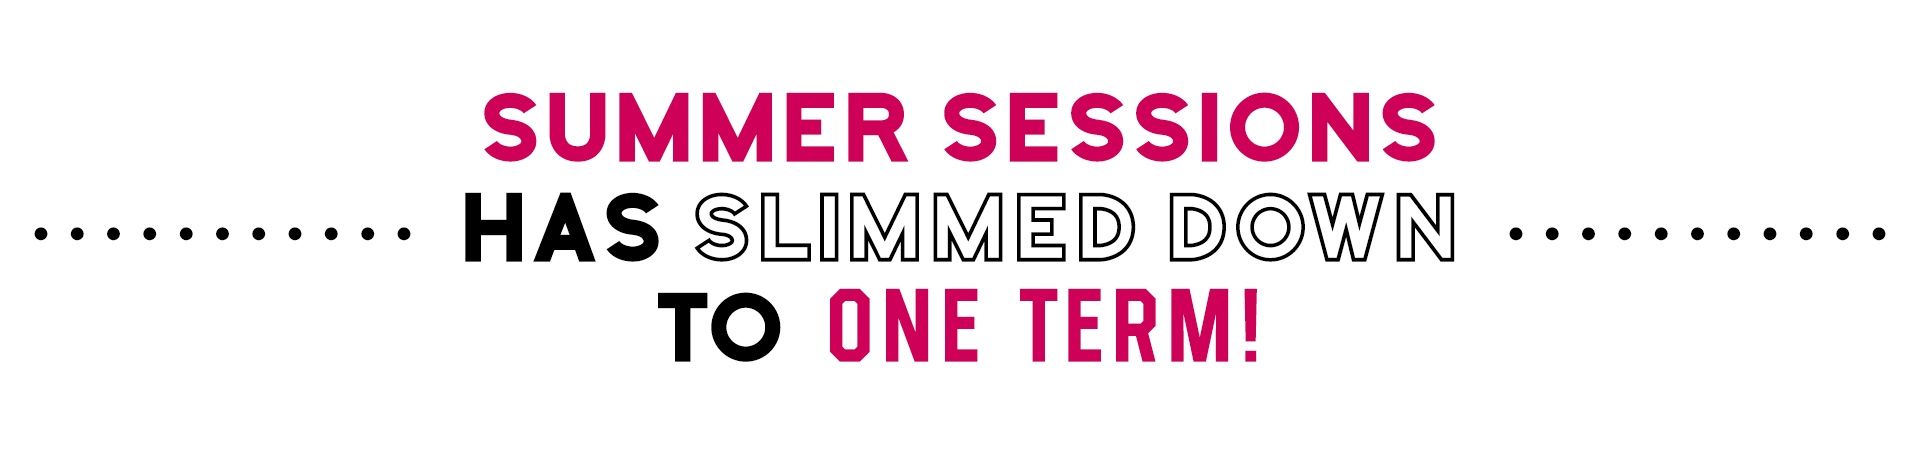 Summer Sessions Has Slimmed Down to One Term